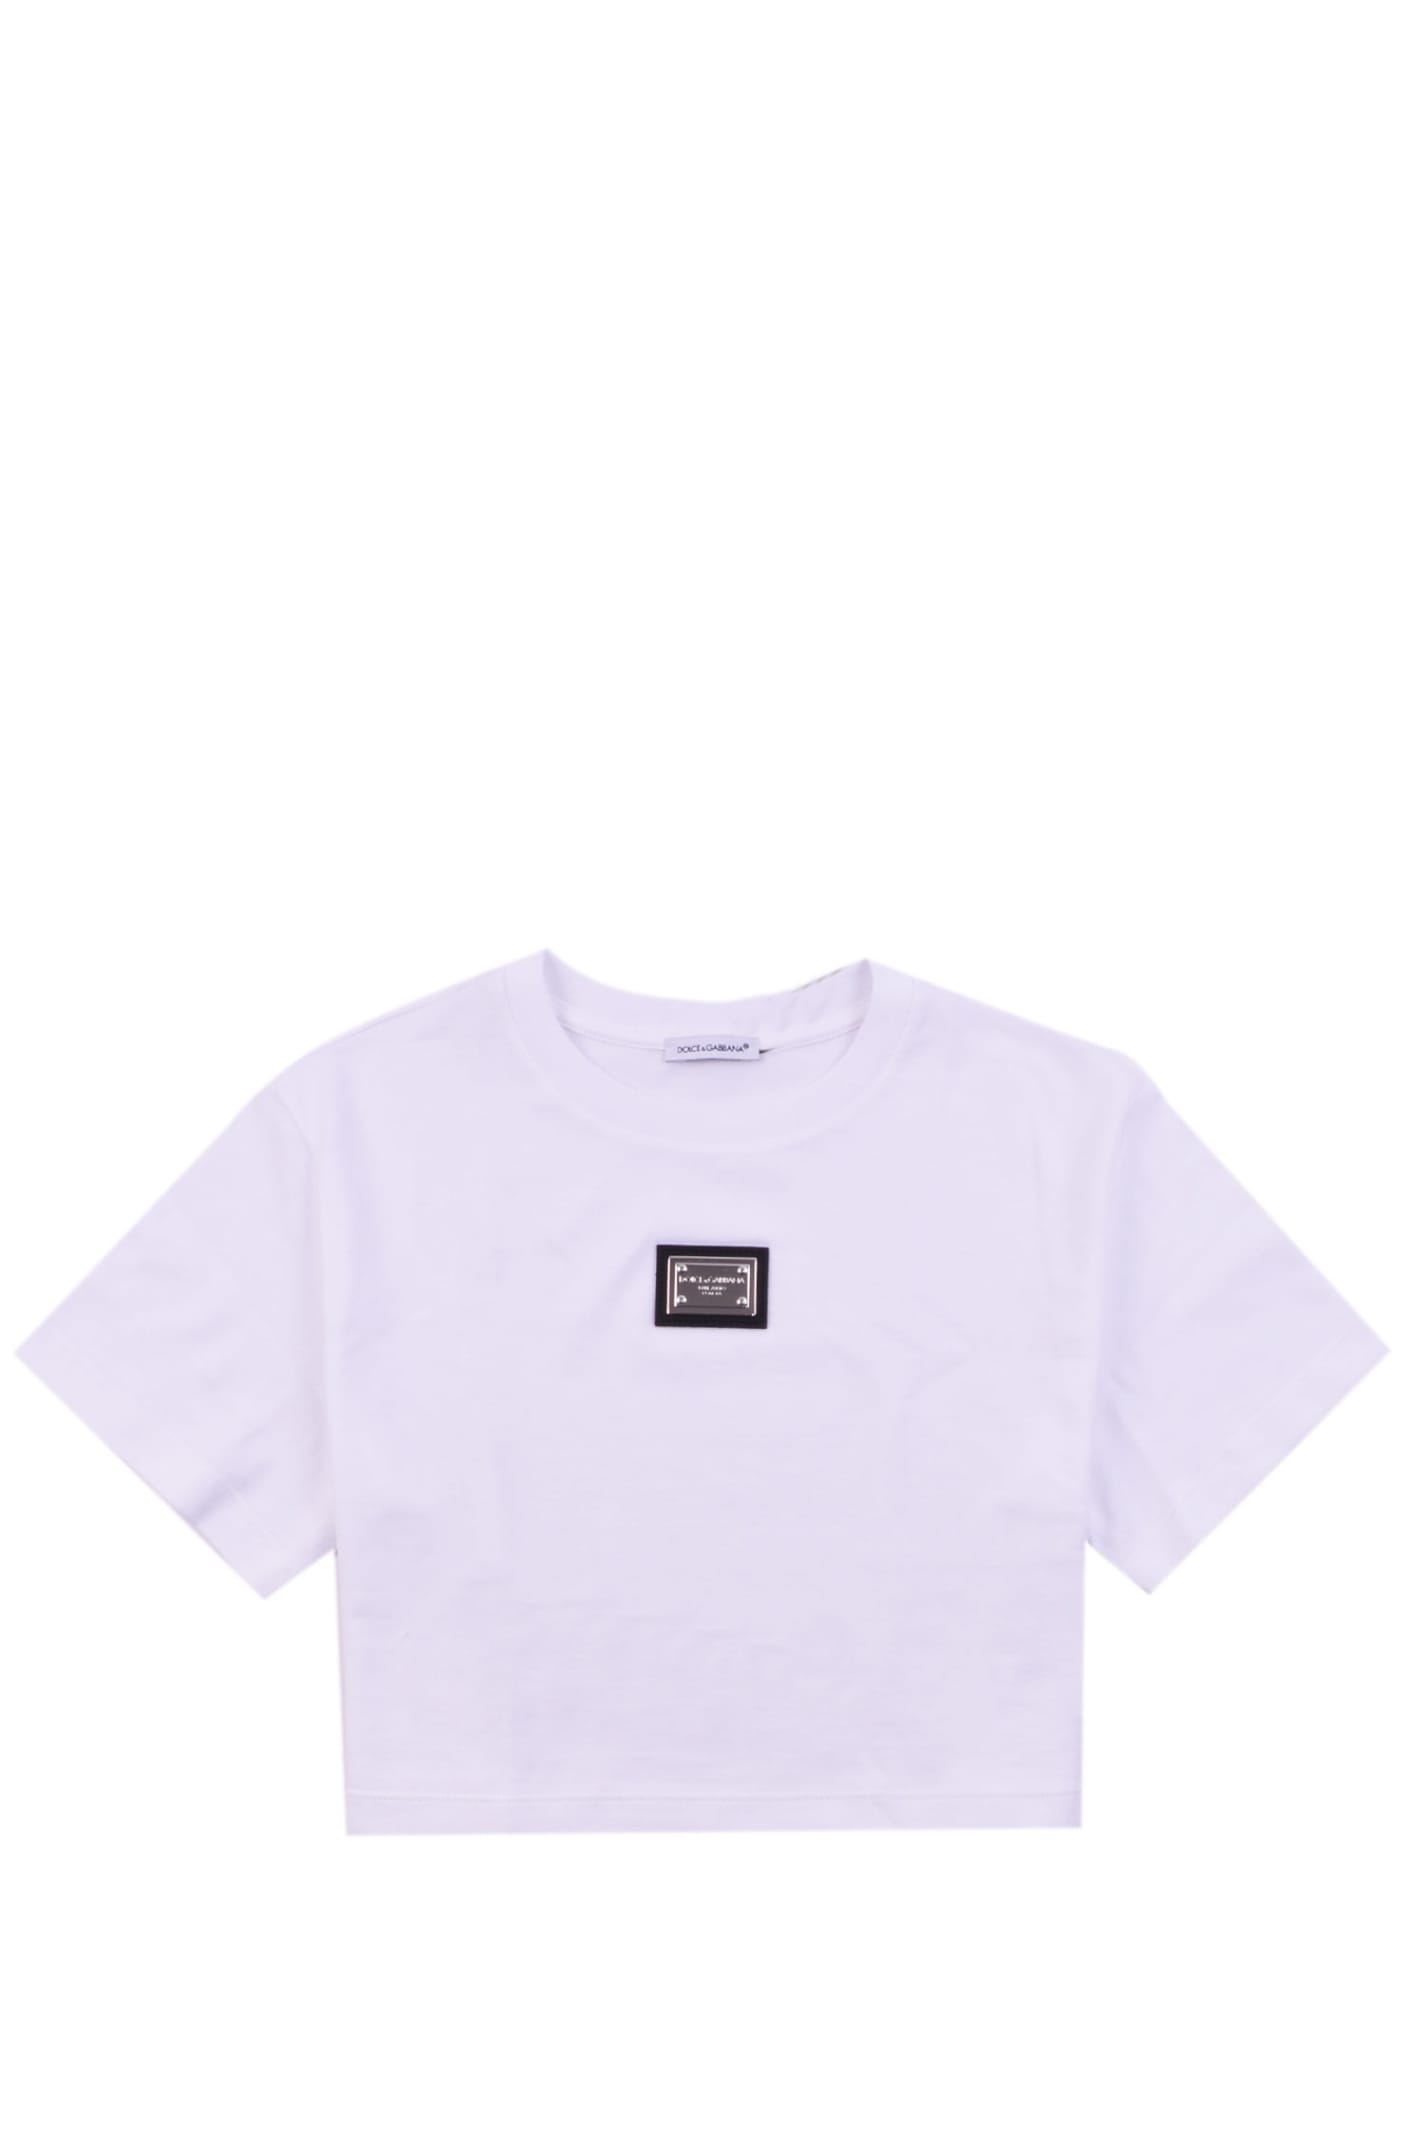 DOLCE & GABBANA CROPPED COTTON T-SHIRT WITH LOGO PLATE